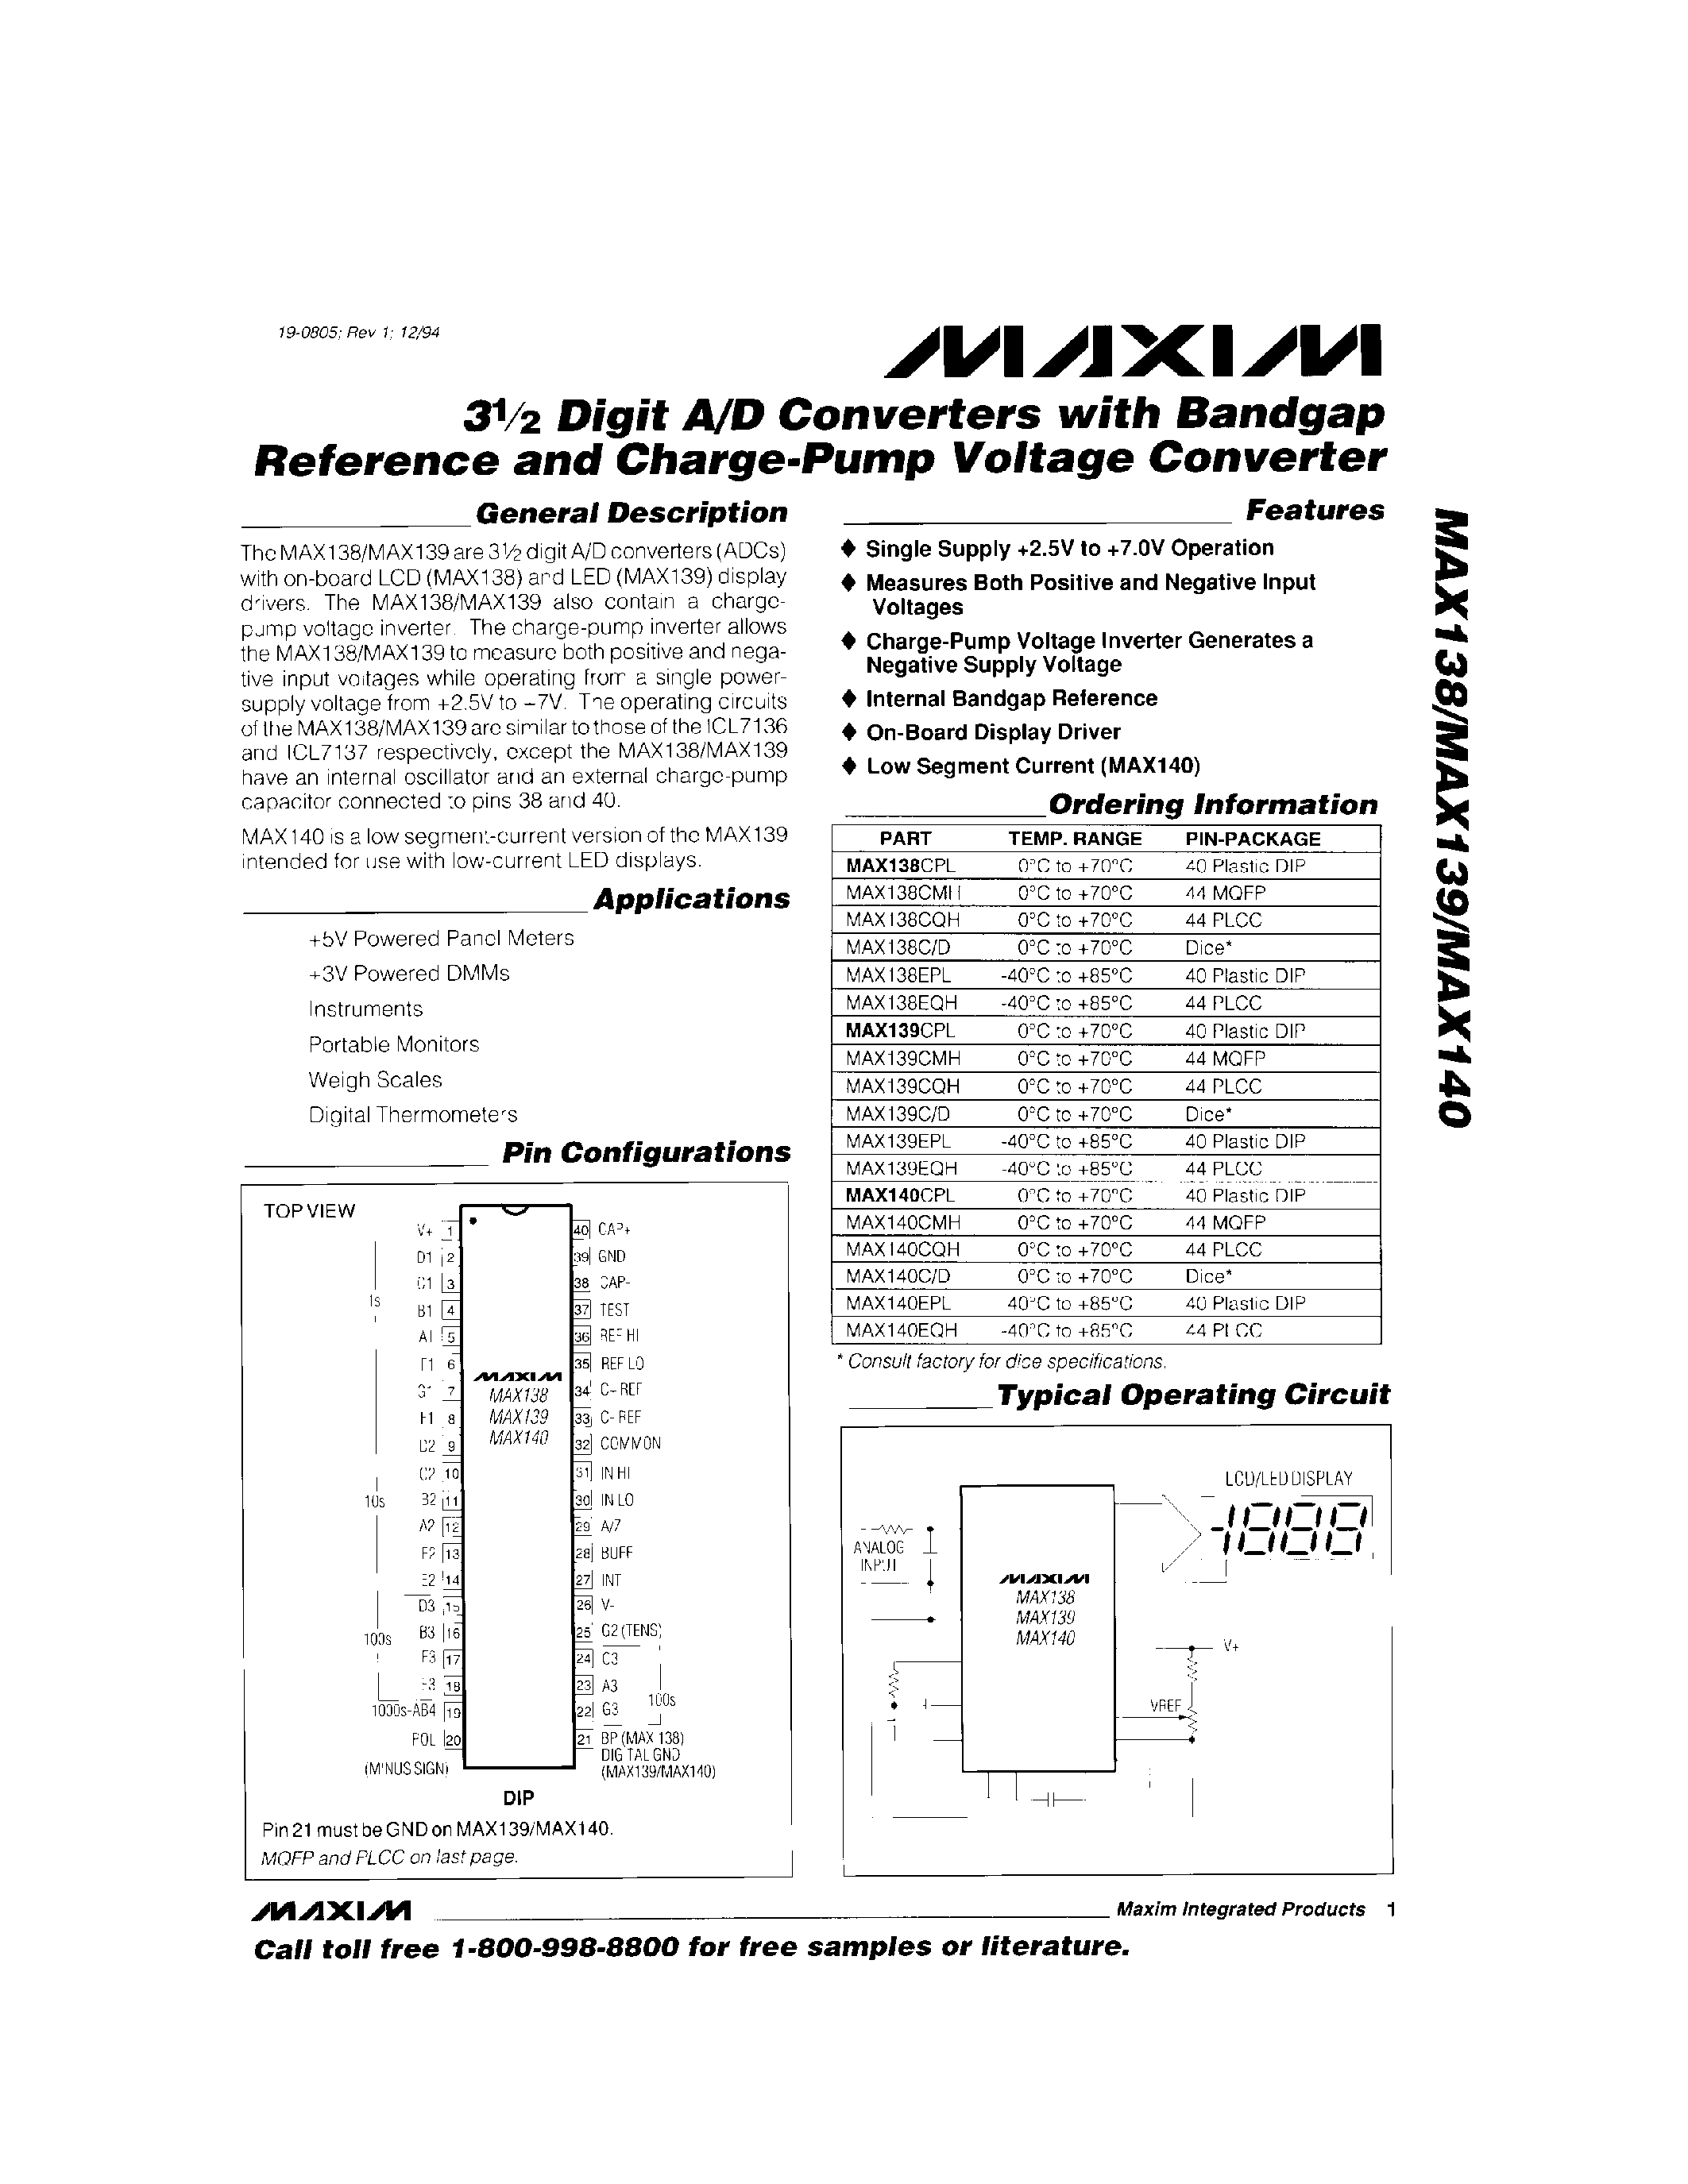 Даташит MAX139C/D - 3Digit A/D Converters with Bandgap Refrence and Charge-Pump Voltage Converter страница 1